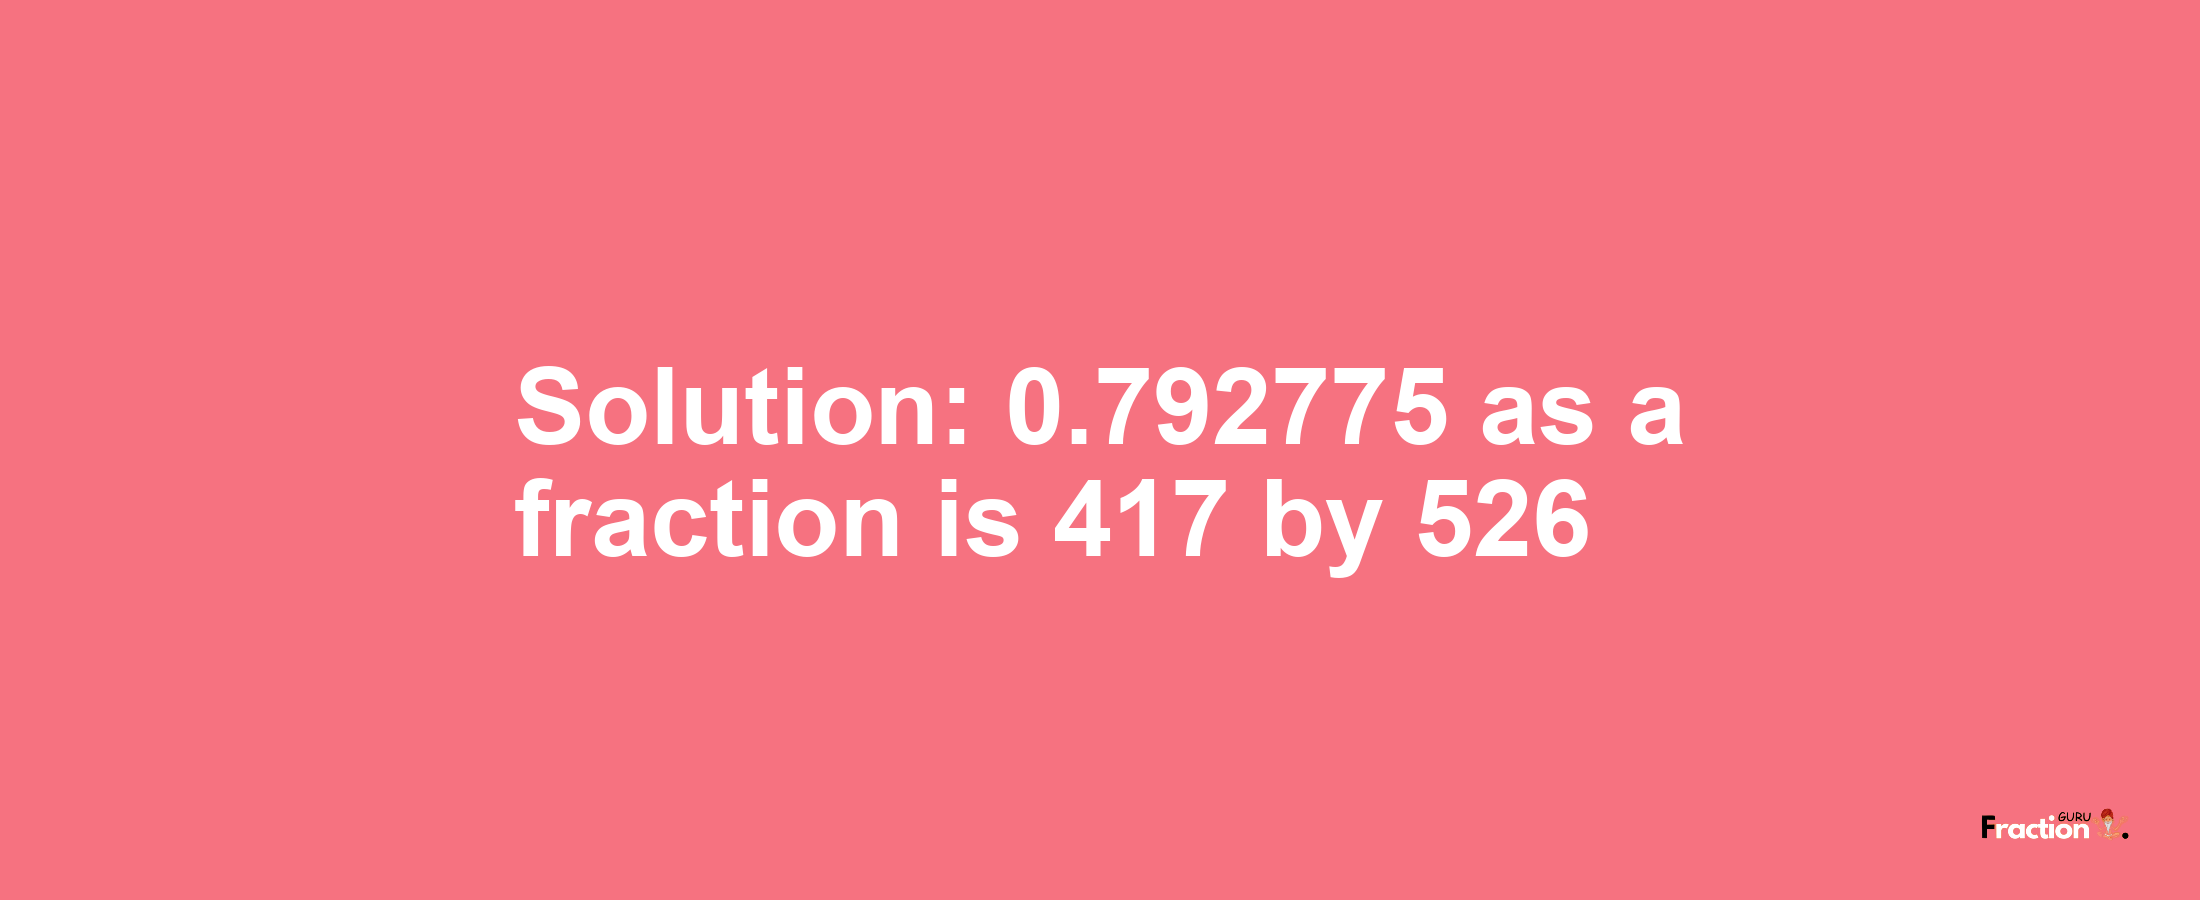 Solution:0.792775 as a fraction is 417/526